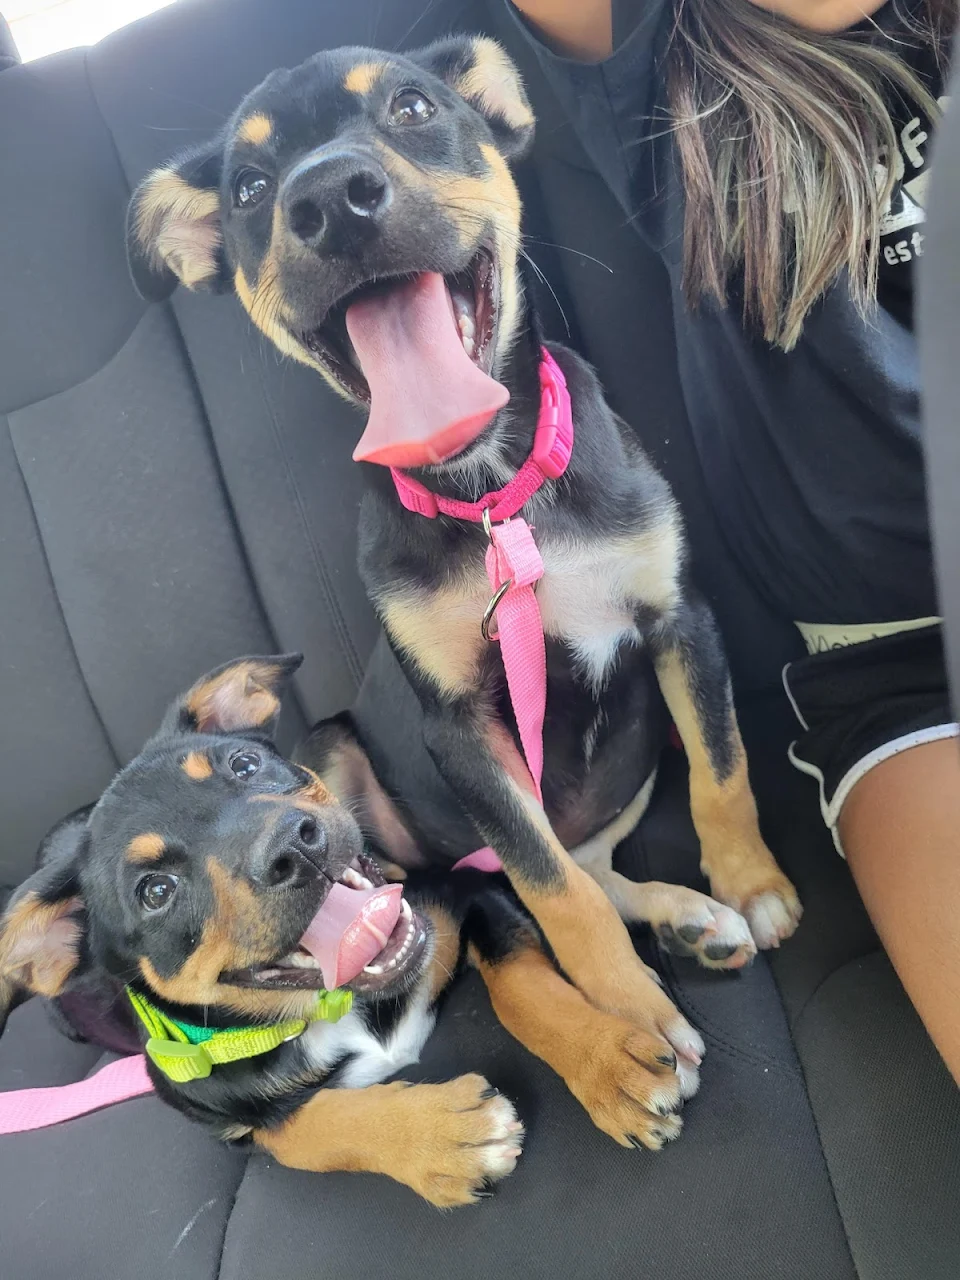 Went to the shelter to convince myself we didn't need another dog. Ended up going home with two